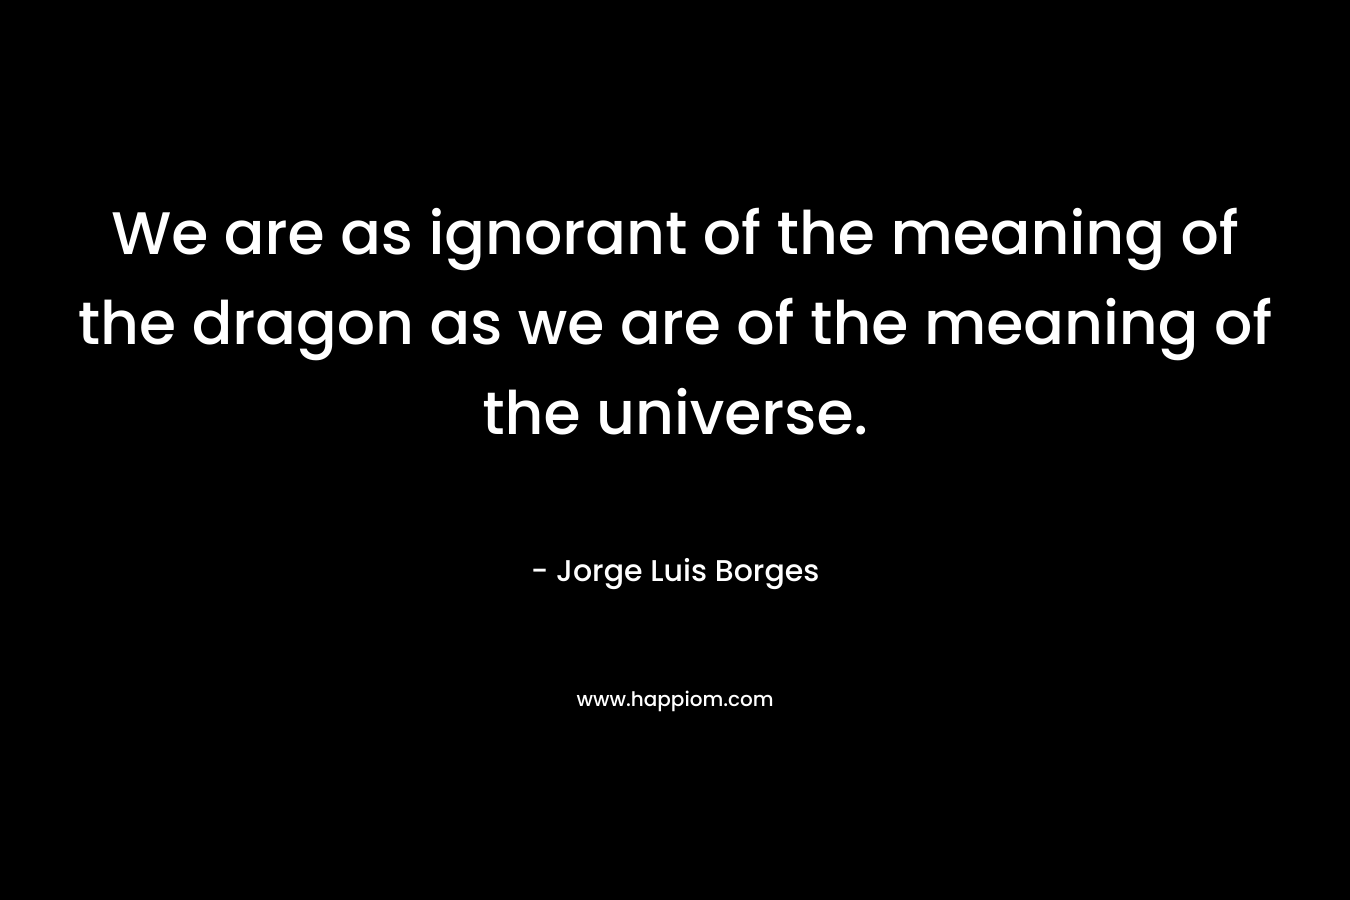 We are as ignorant of the meaning of the dragon as we are of the meaning of the universe.